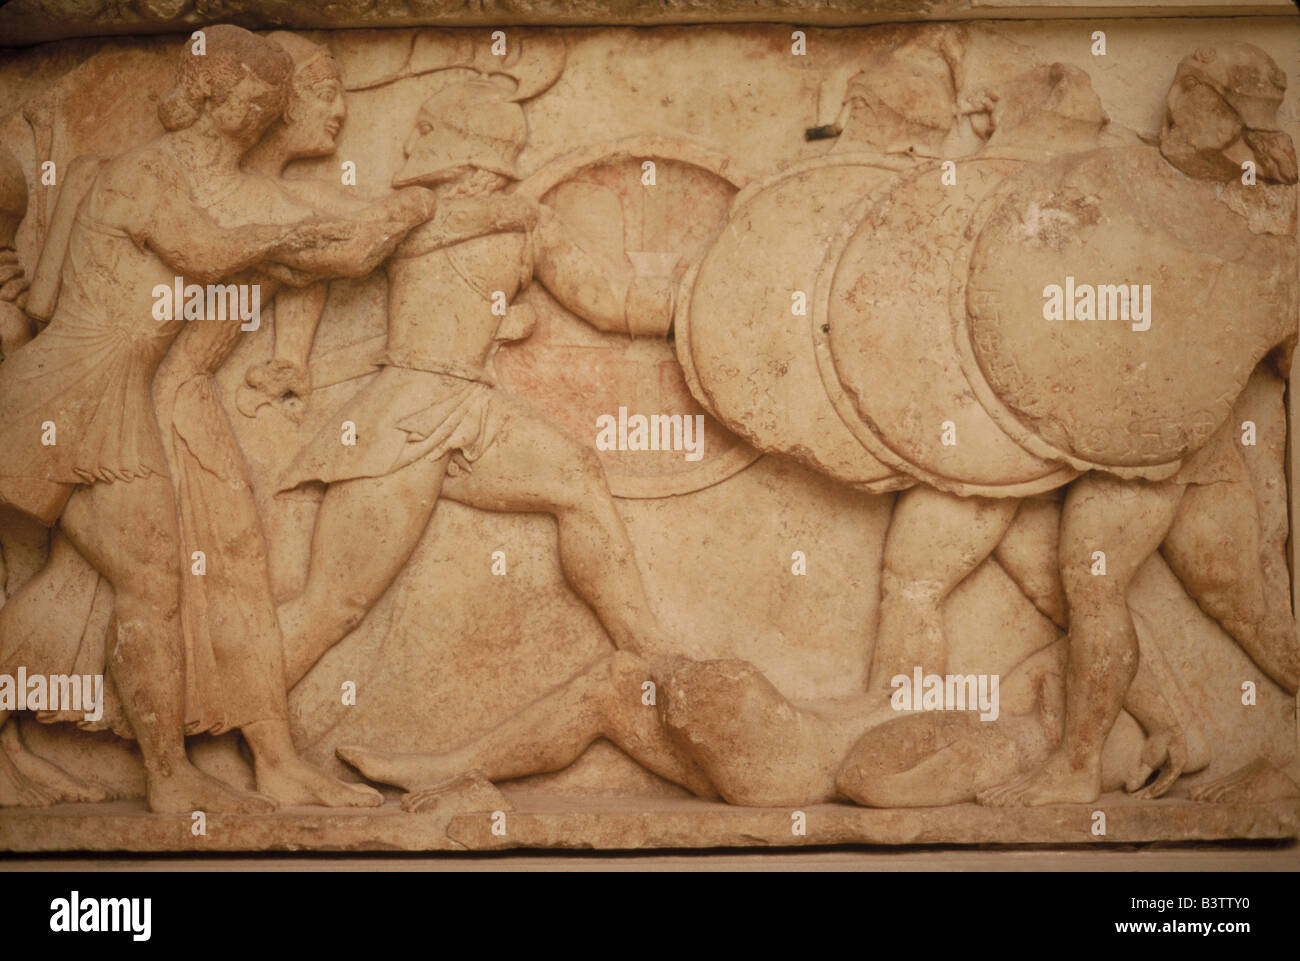 Greece, Delphi. Ancient warriors battle in this classical era decoration from the Treasury at Delphi, shown in the Delphi Museum Stock Photo